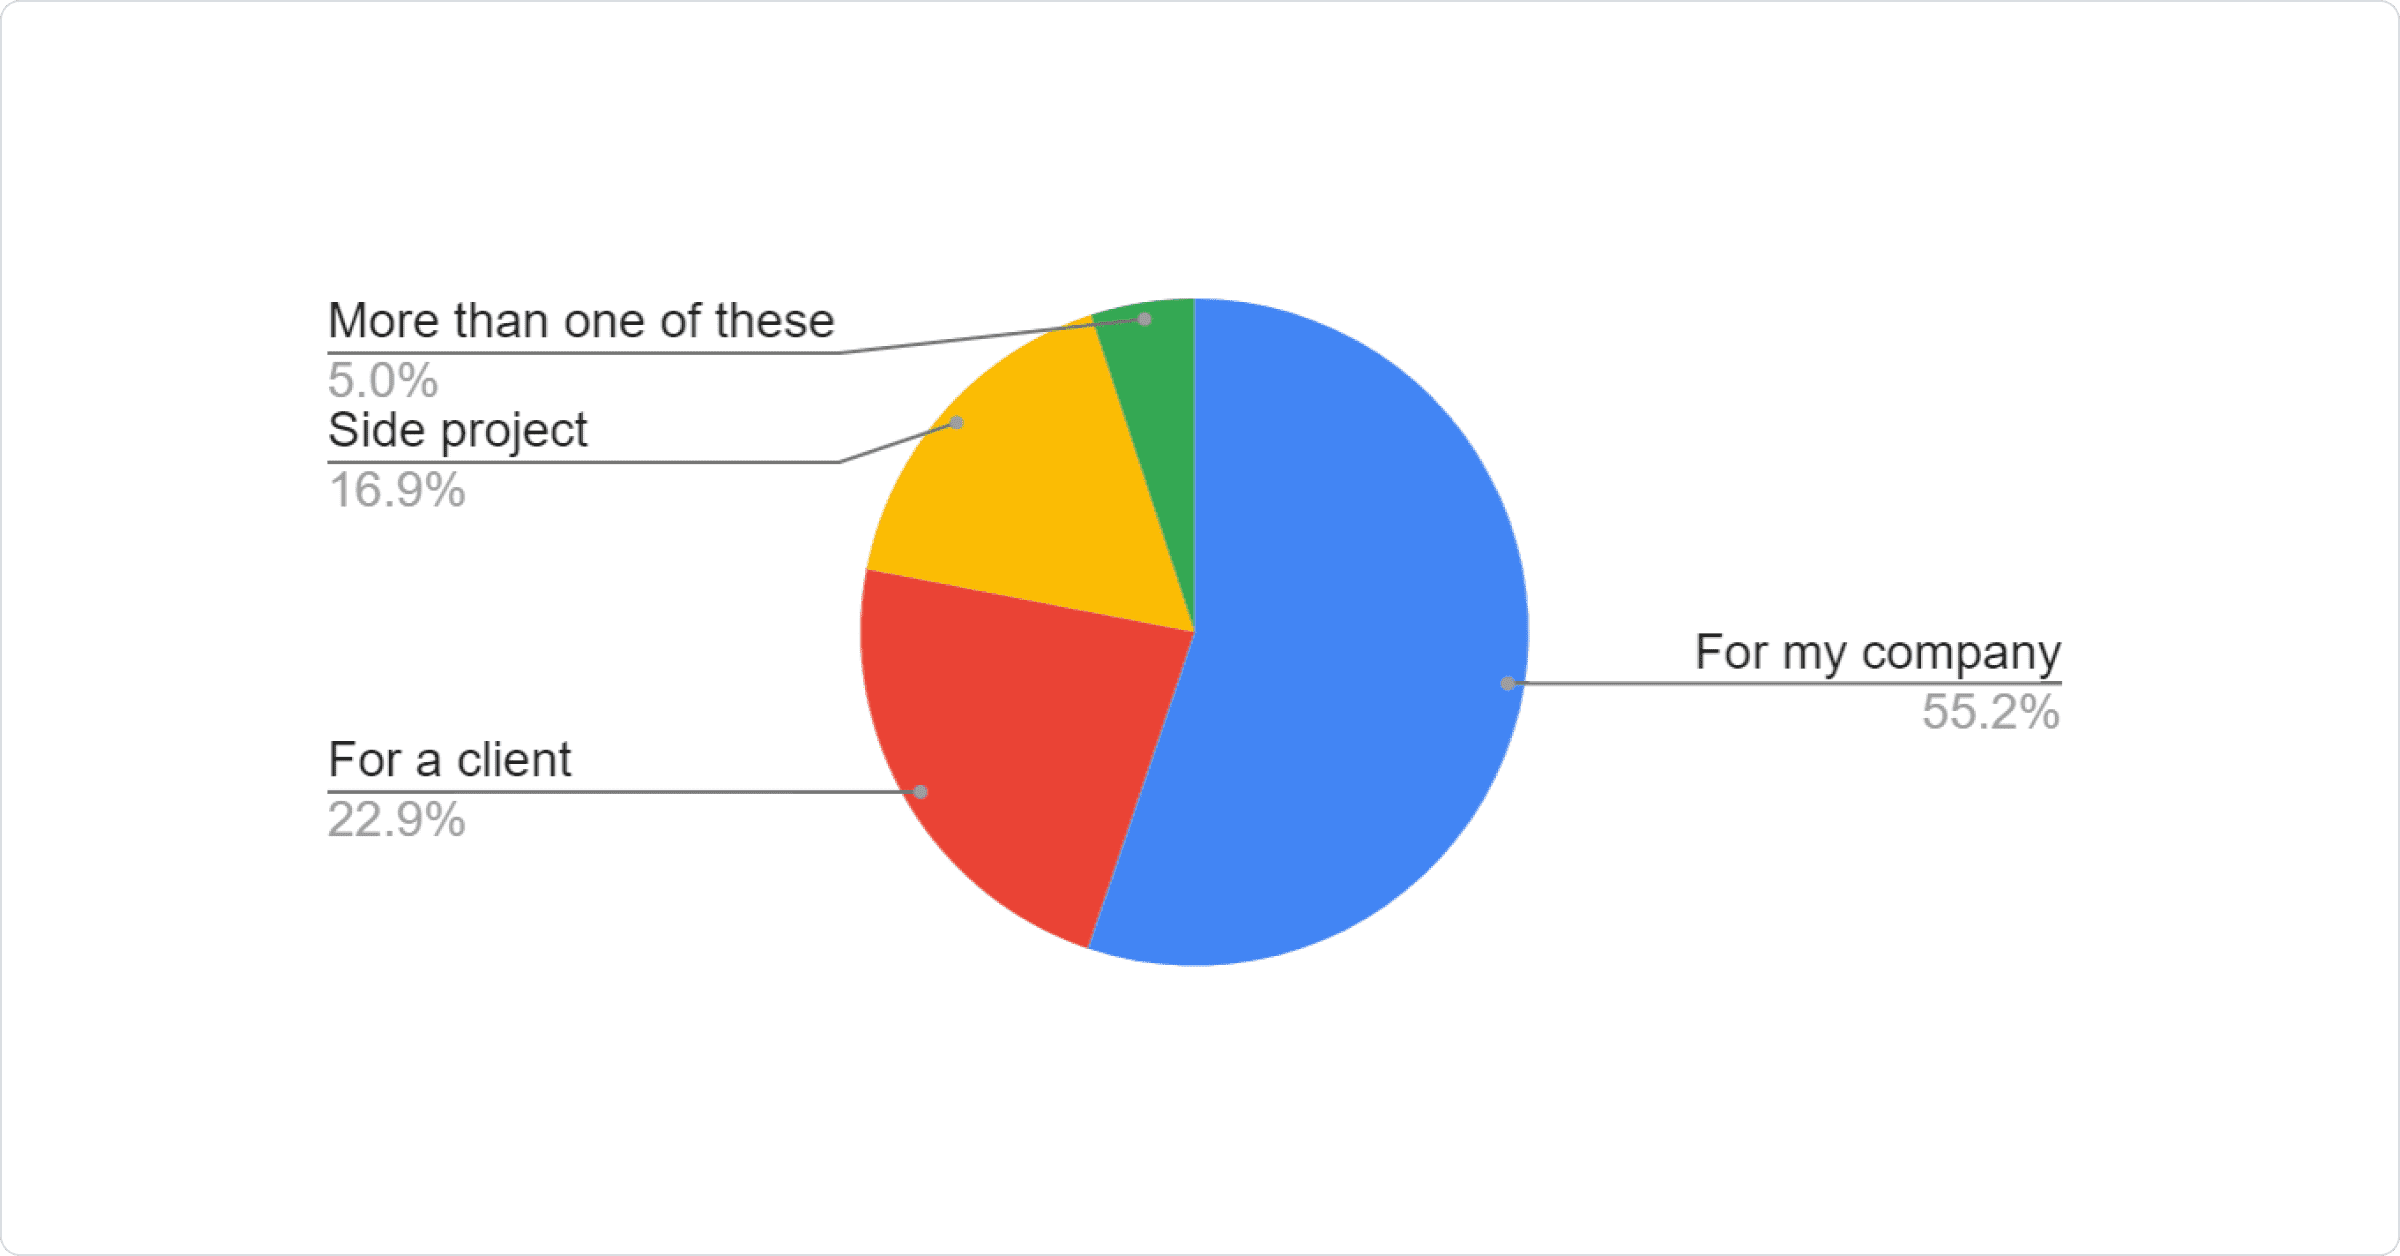 Pie chart: 55.17% For my company\n22.86% For a client, 16.94% Side project, 5.03% More than one of these.